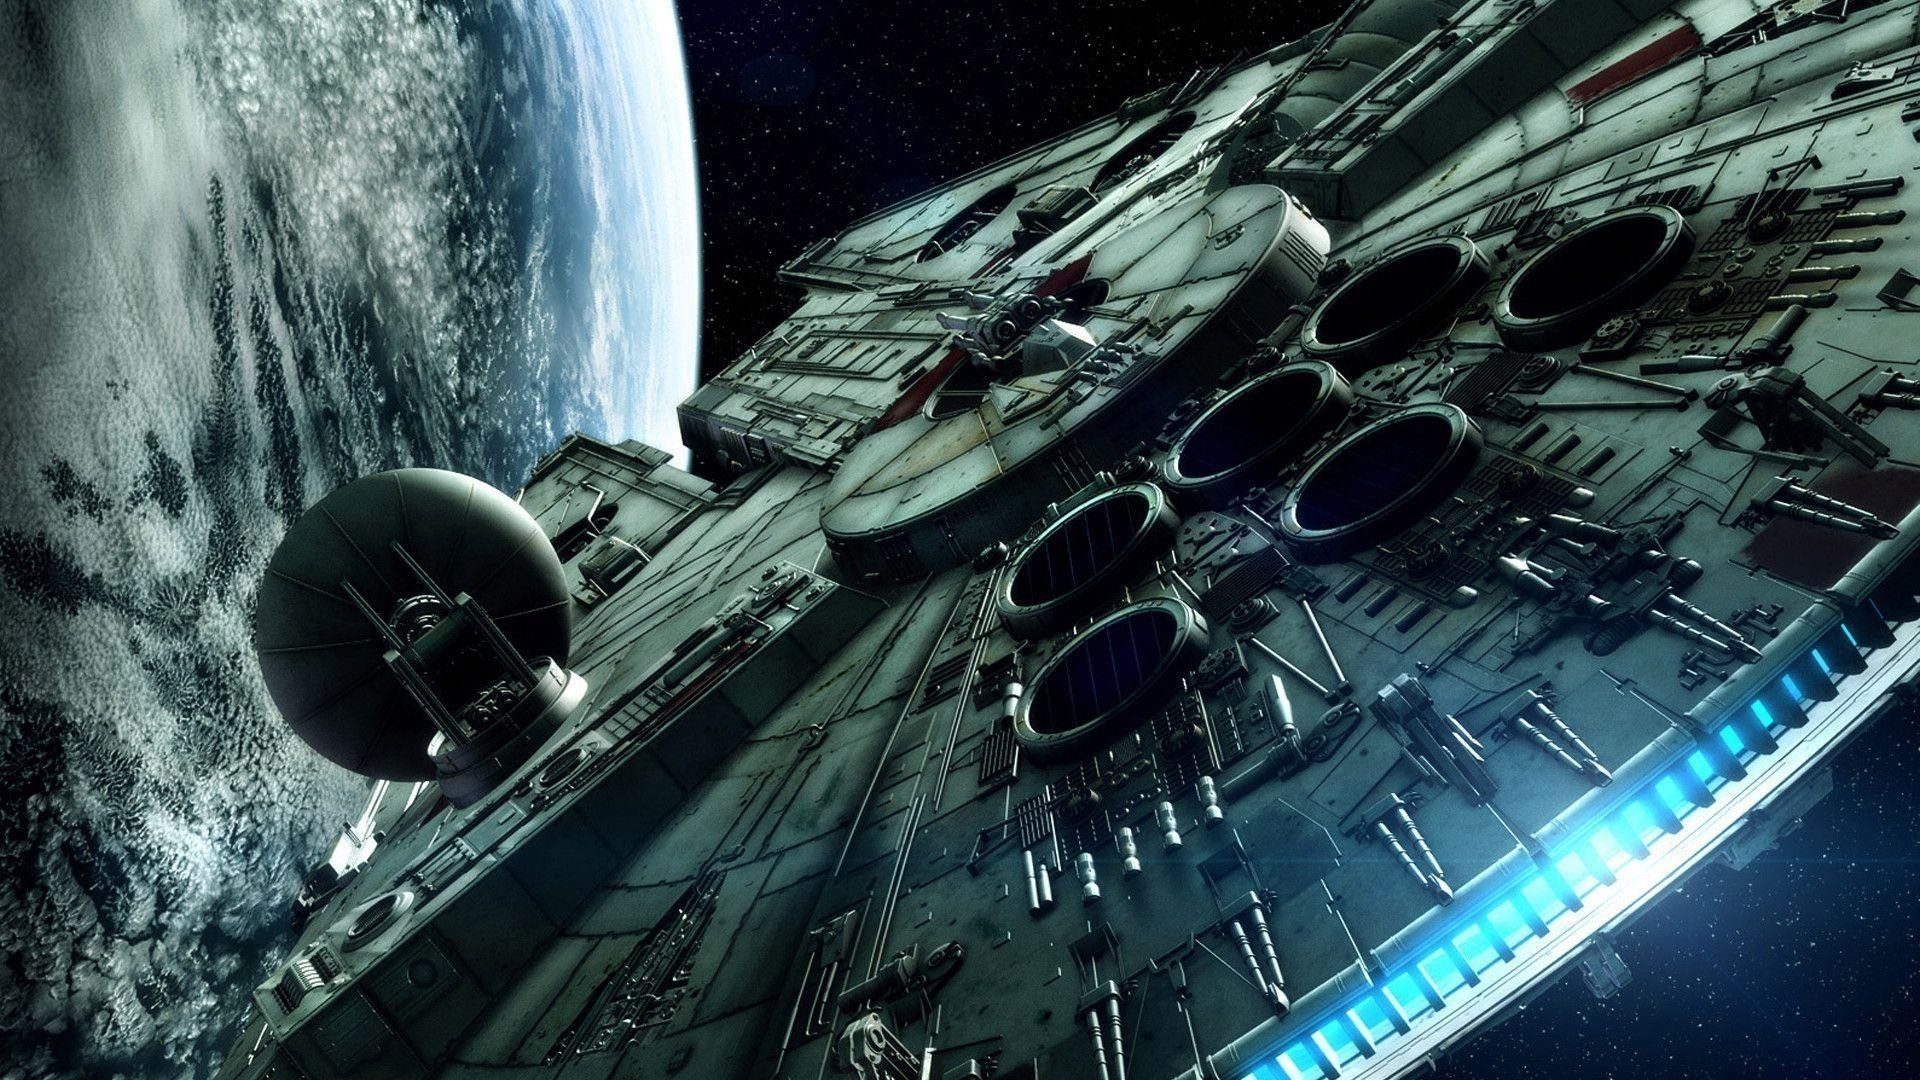 10 Top Hd Star Wars Wallpaper 1920X1080 FULL HD 1920×1080 For PC Background